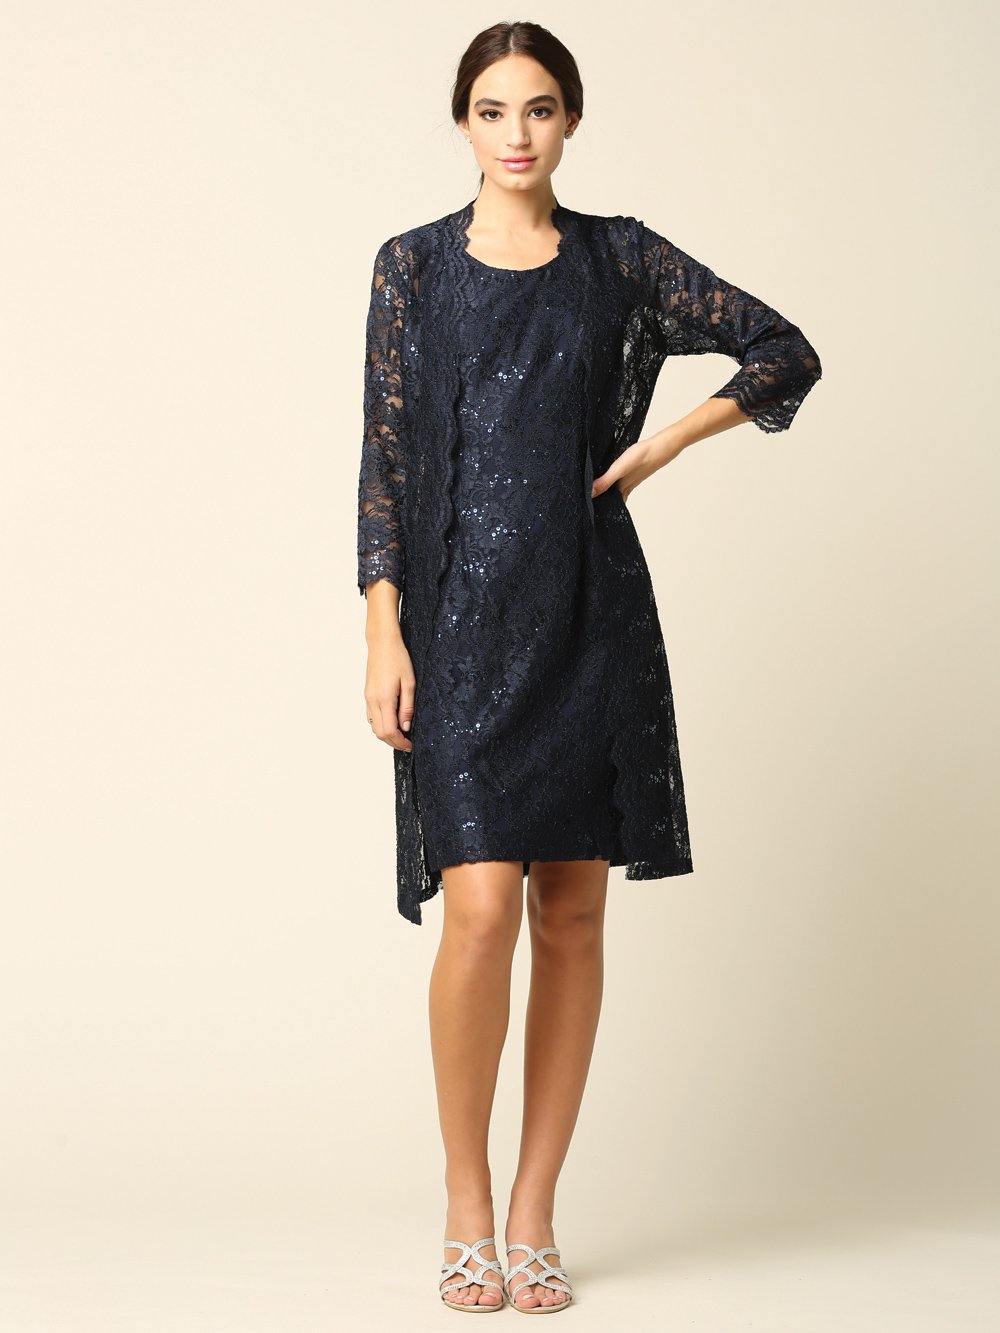 Short Mother of the Bride Lace Jacket Dress - The Dress Outlet Eva Fashion